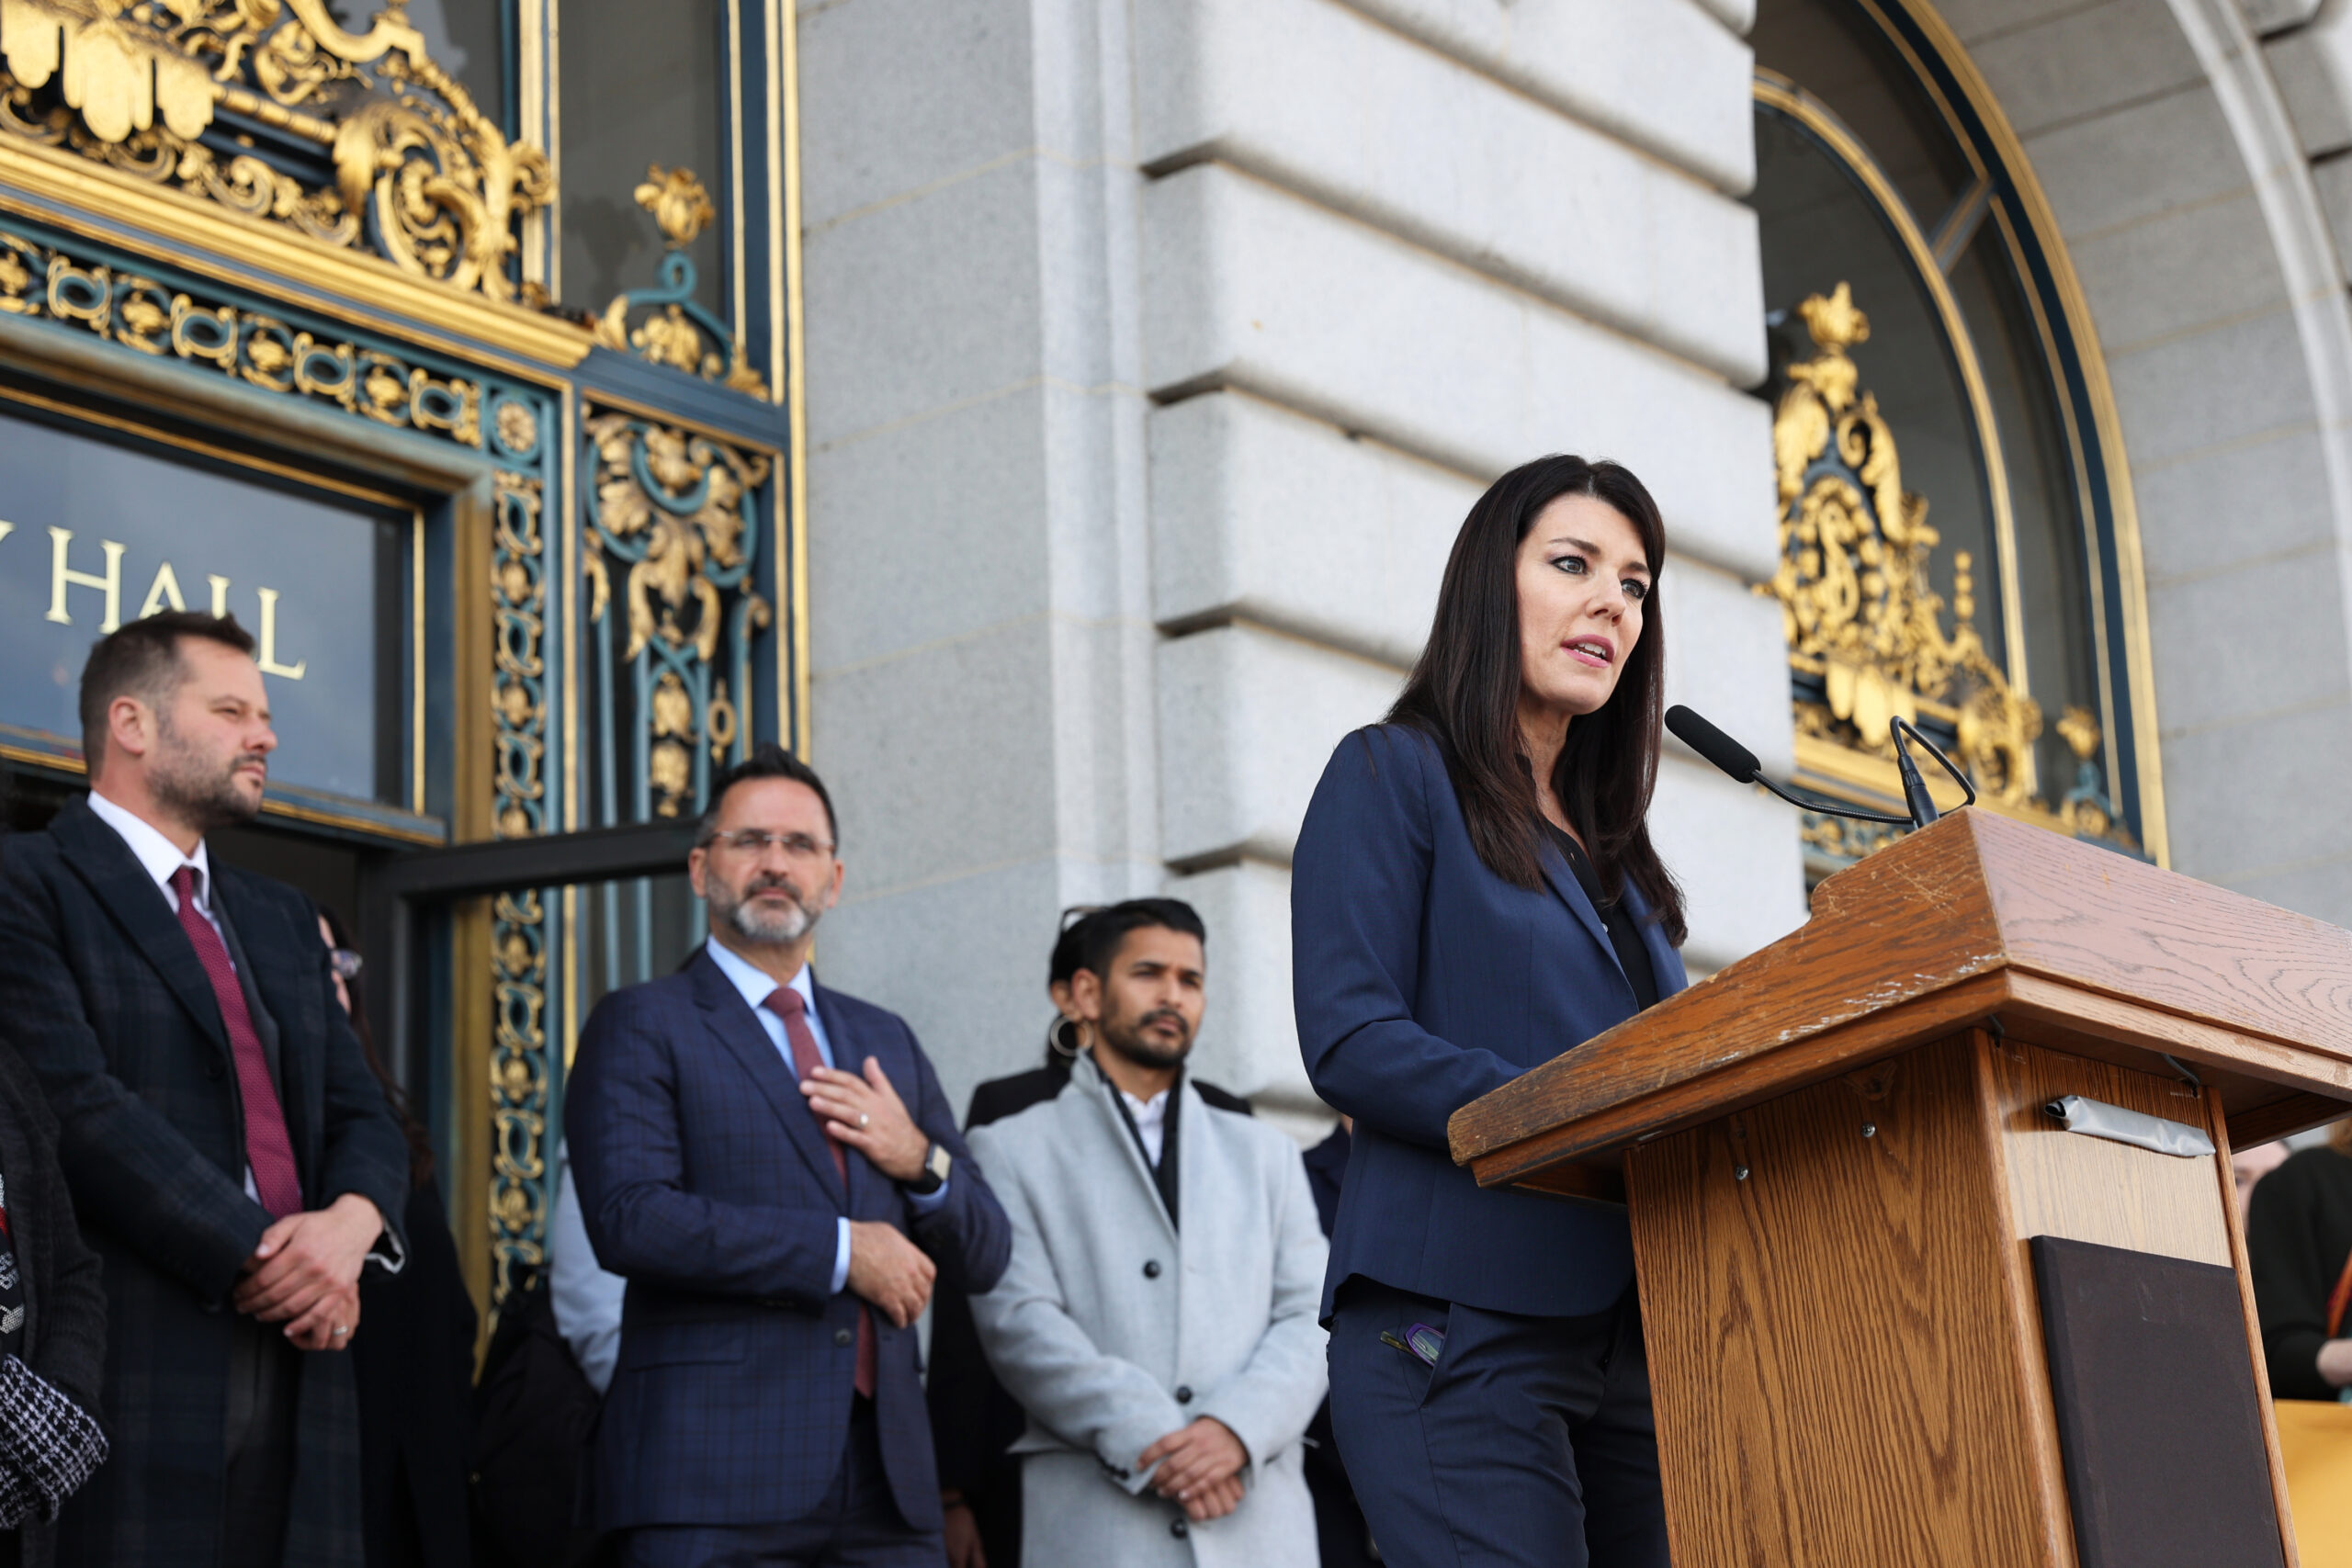 Board shakeup? Supervisors races could reshape SF’s political map this November